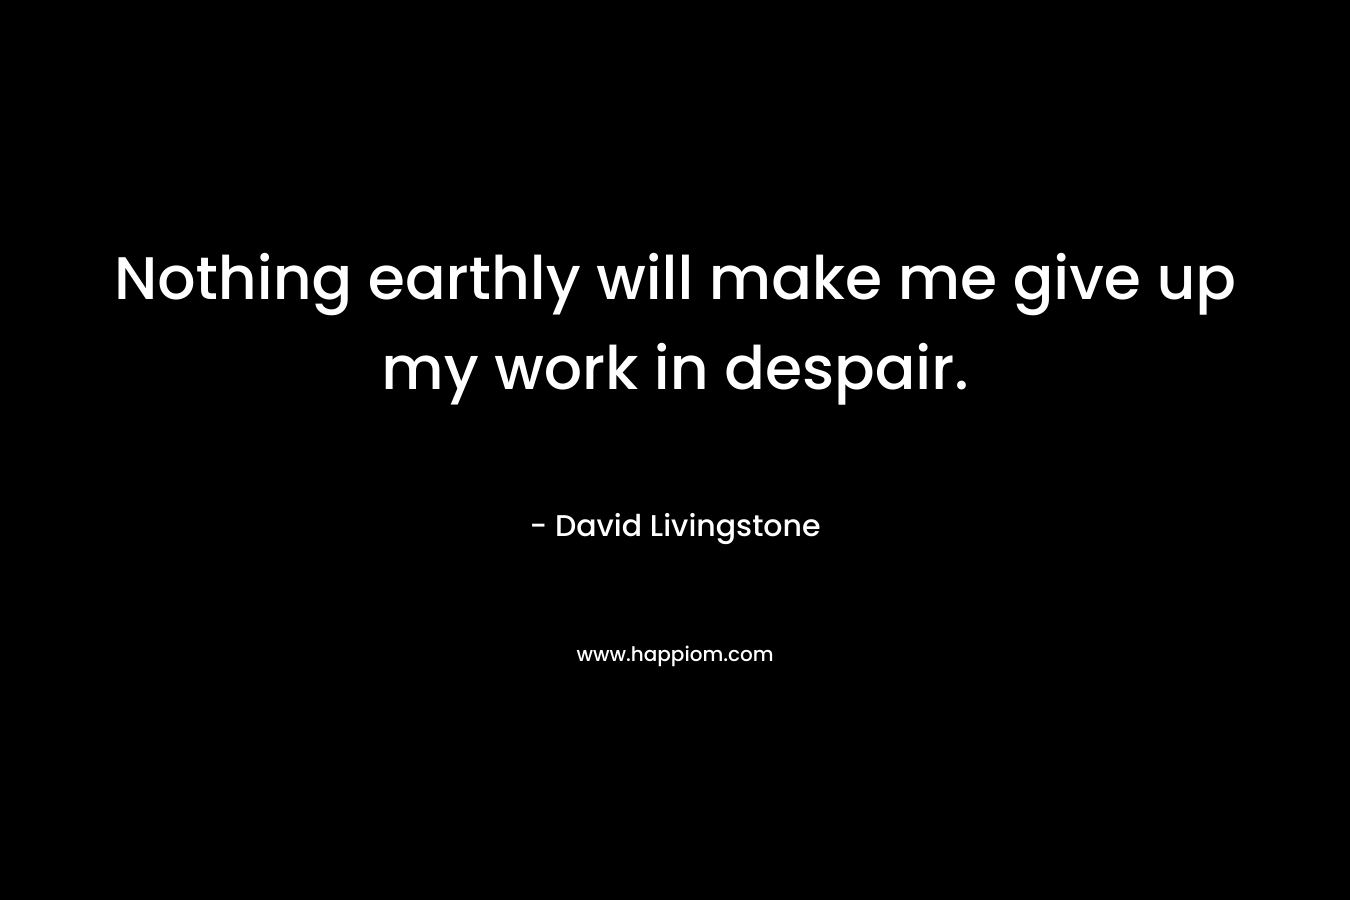 Nothing earthly will make me give up my work in despair. – David Livingstone